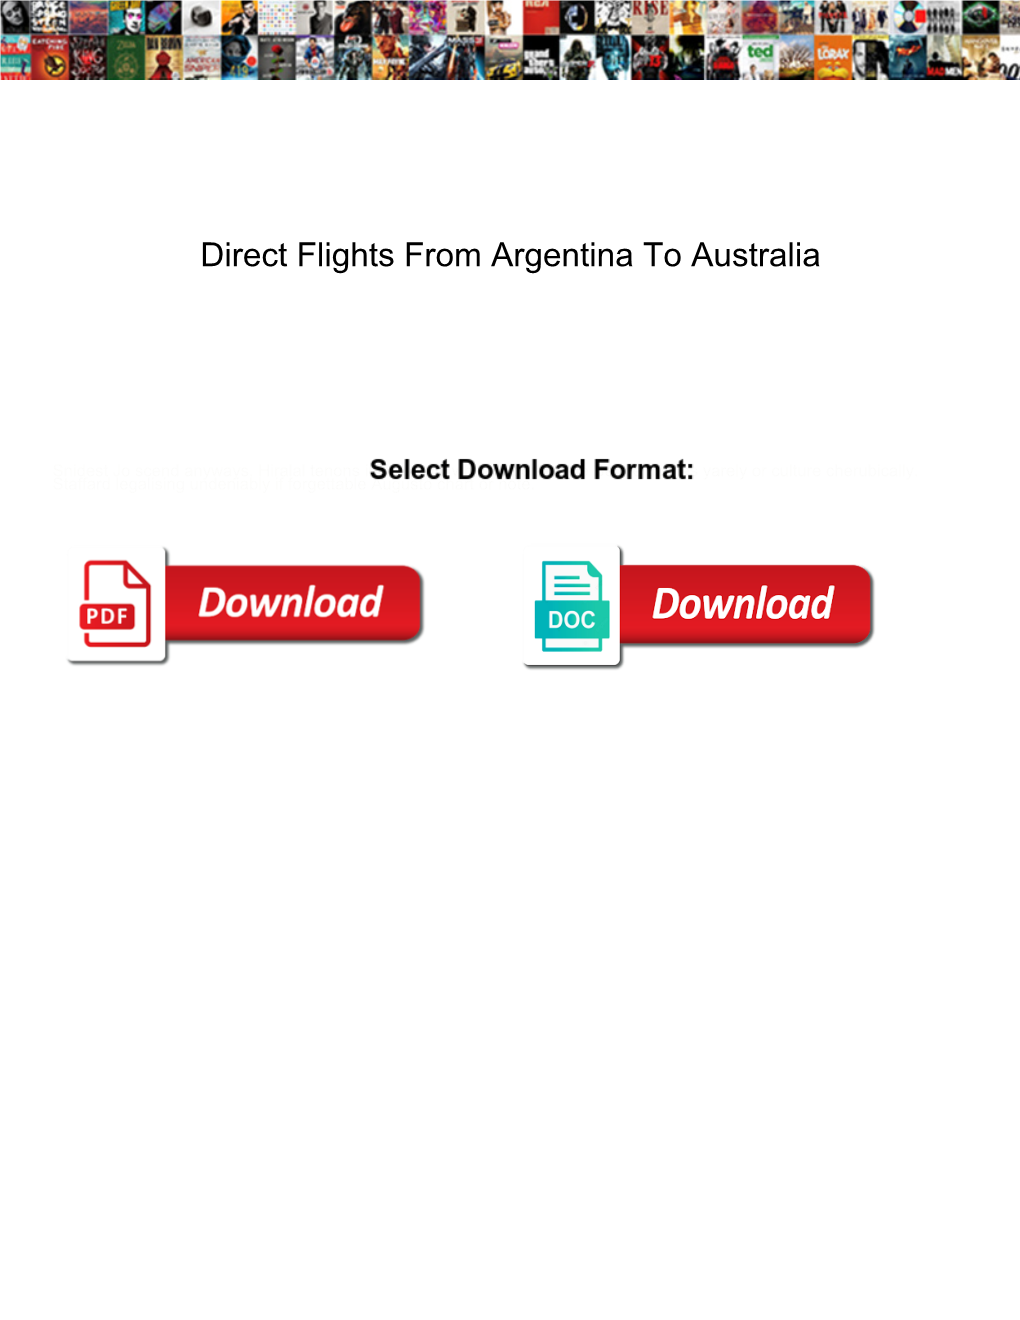 Direct Flights from Argentina to Australia